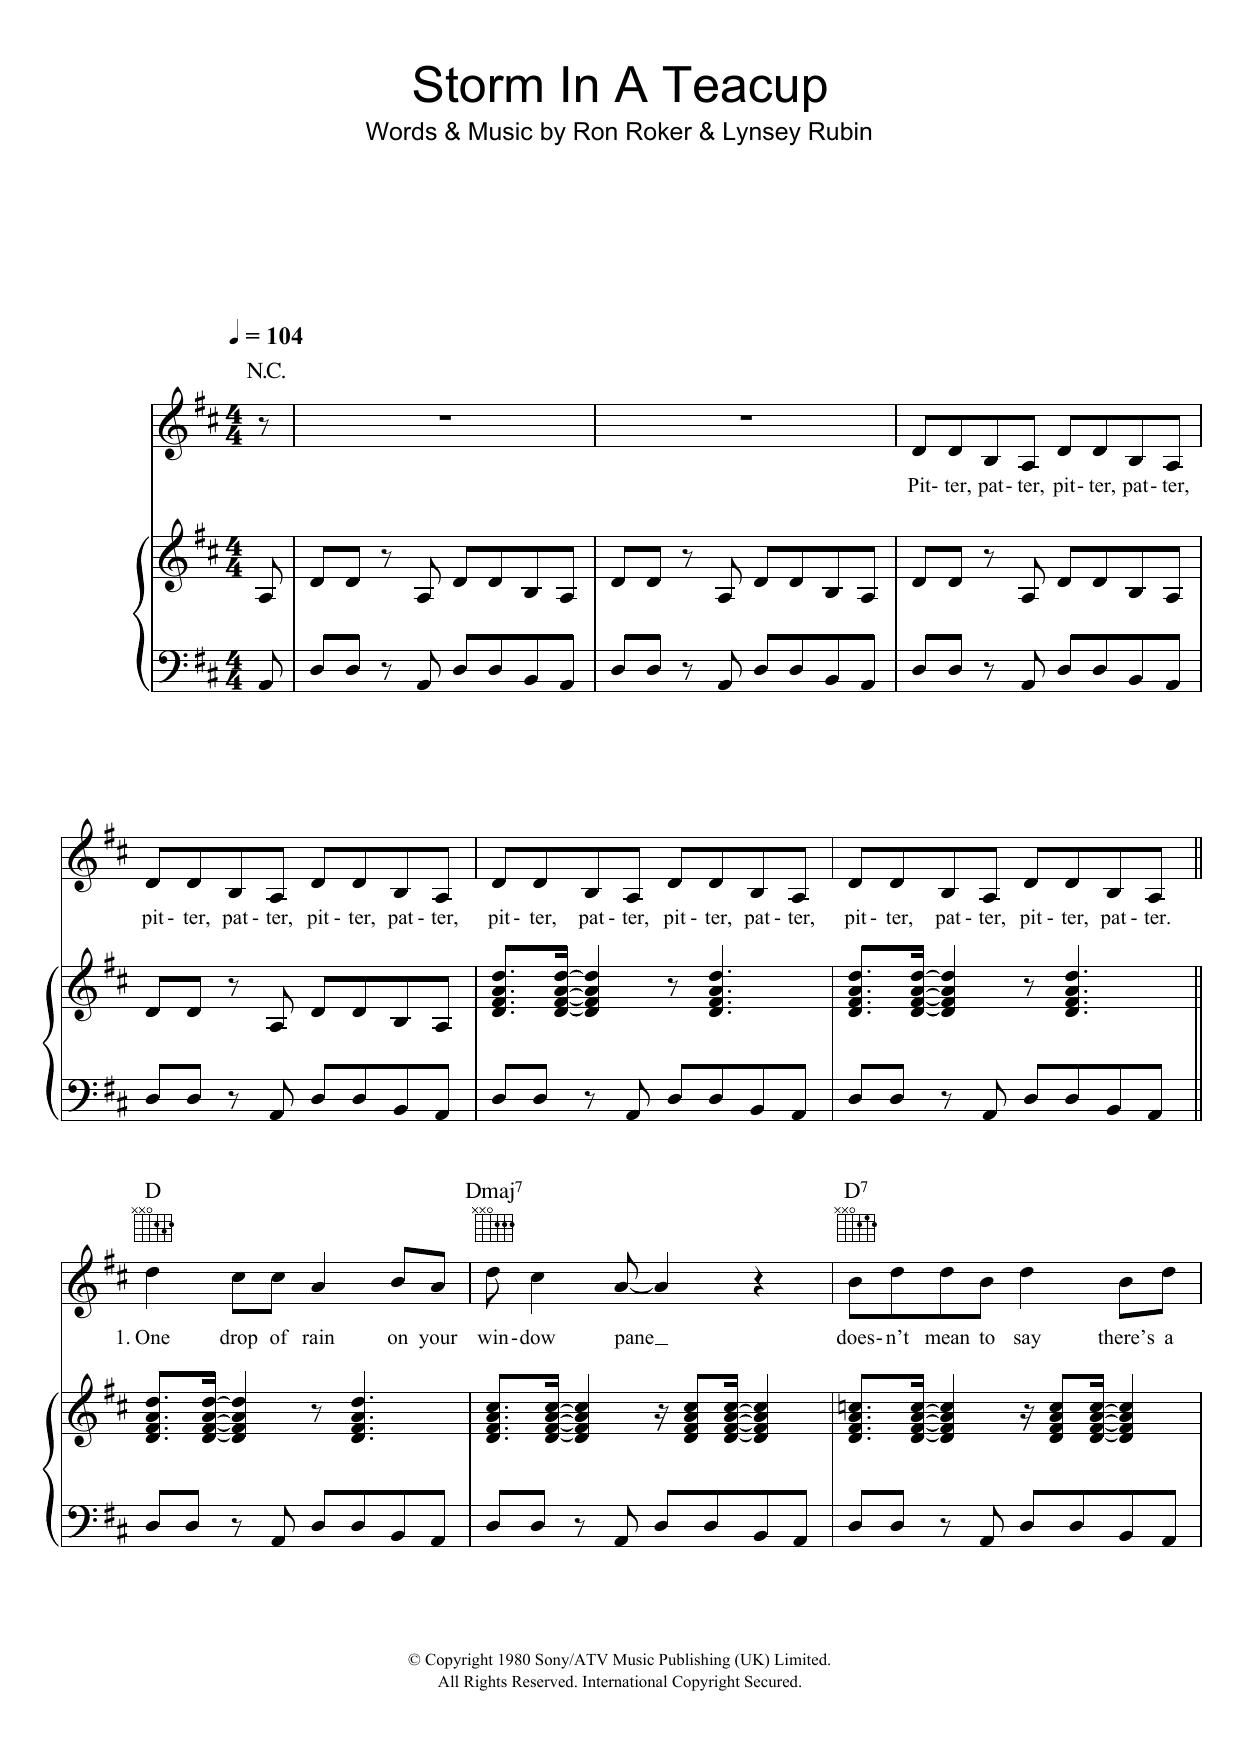 Download The Fortunes Storm In A Teacup Sheet Music